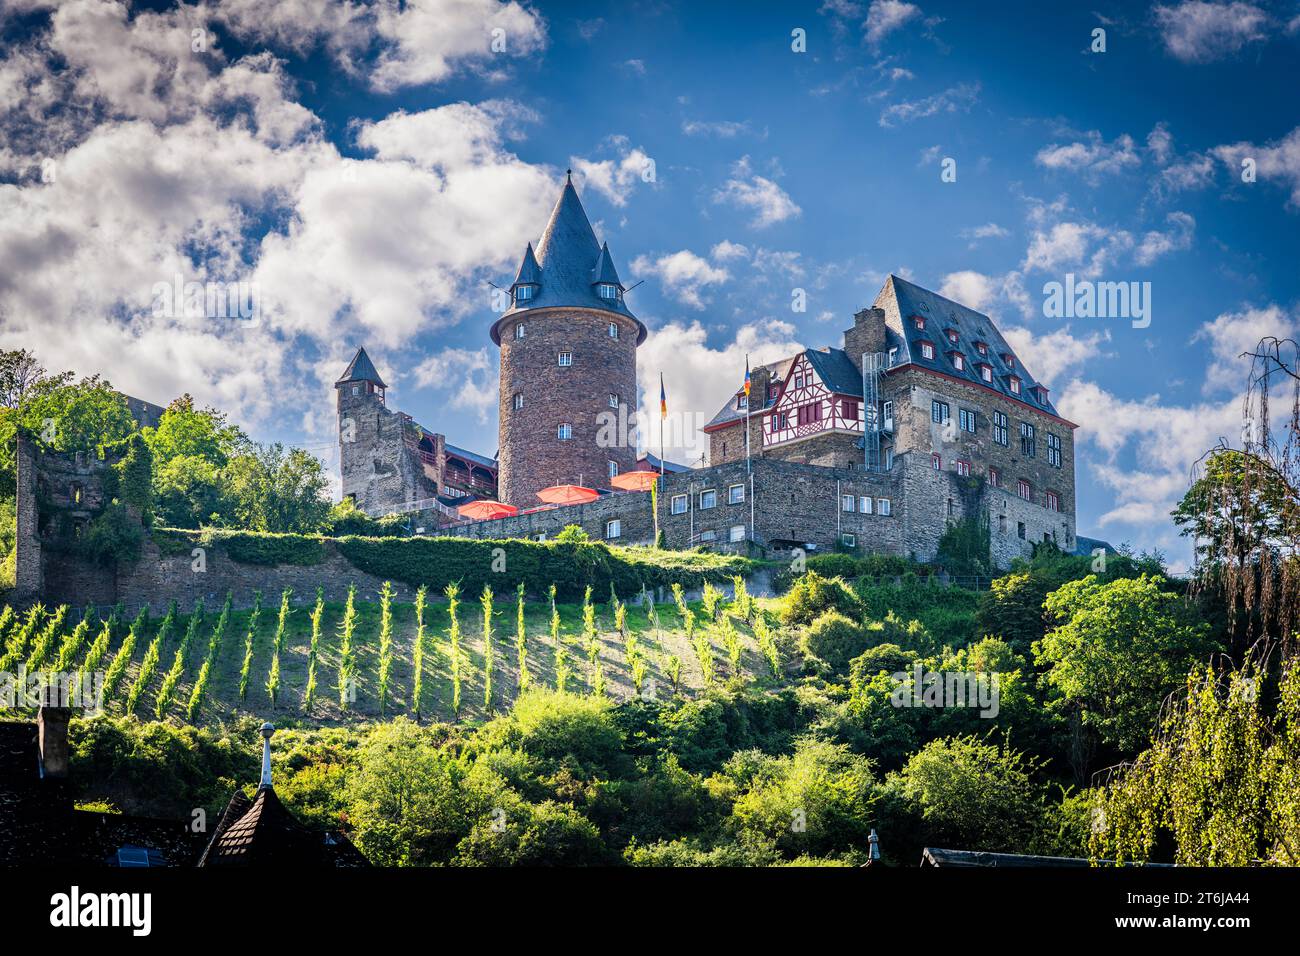 The city of Bacharach on the Middle Rhine, Stahleck Castle and several city towers frame the core city, Werner Chapel and St. Peter stand out, Stock Photo